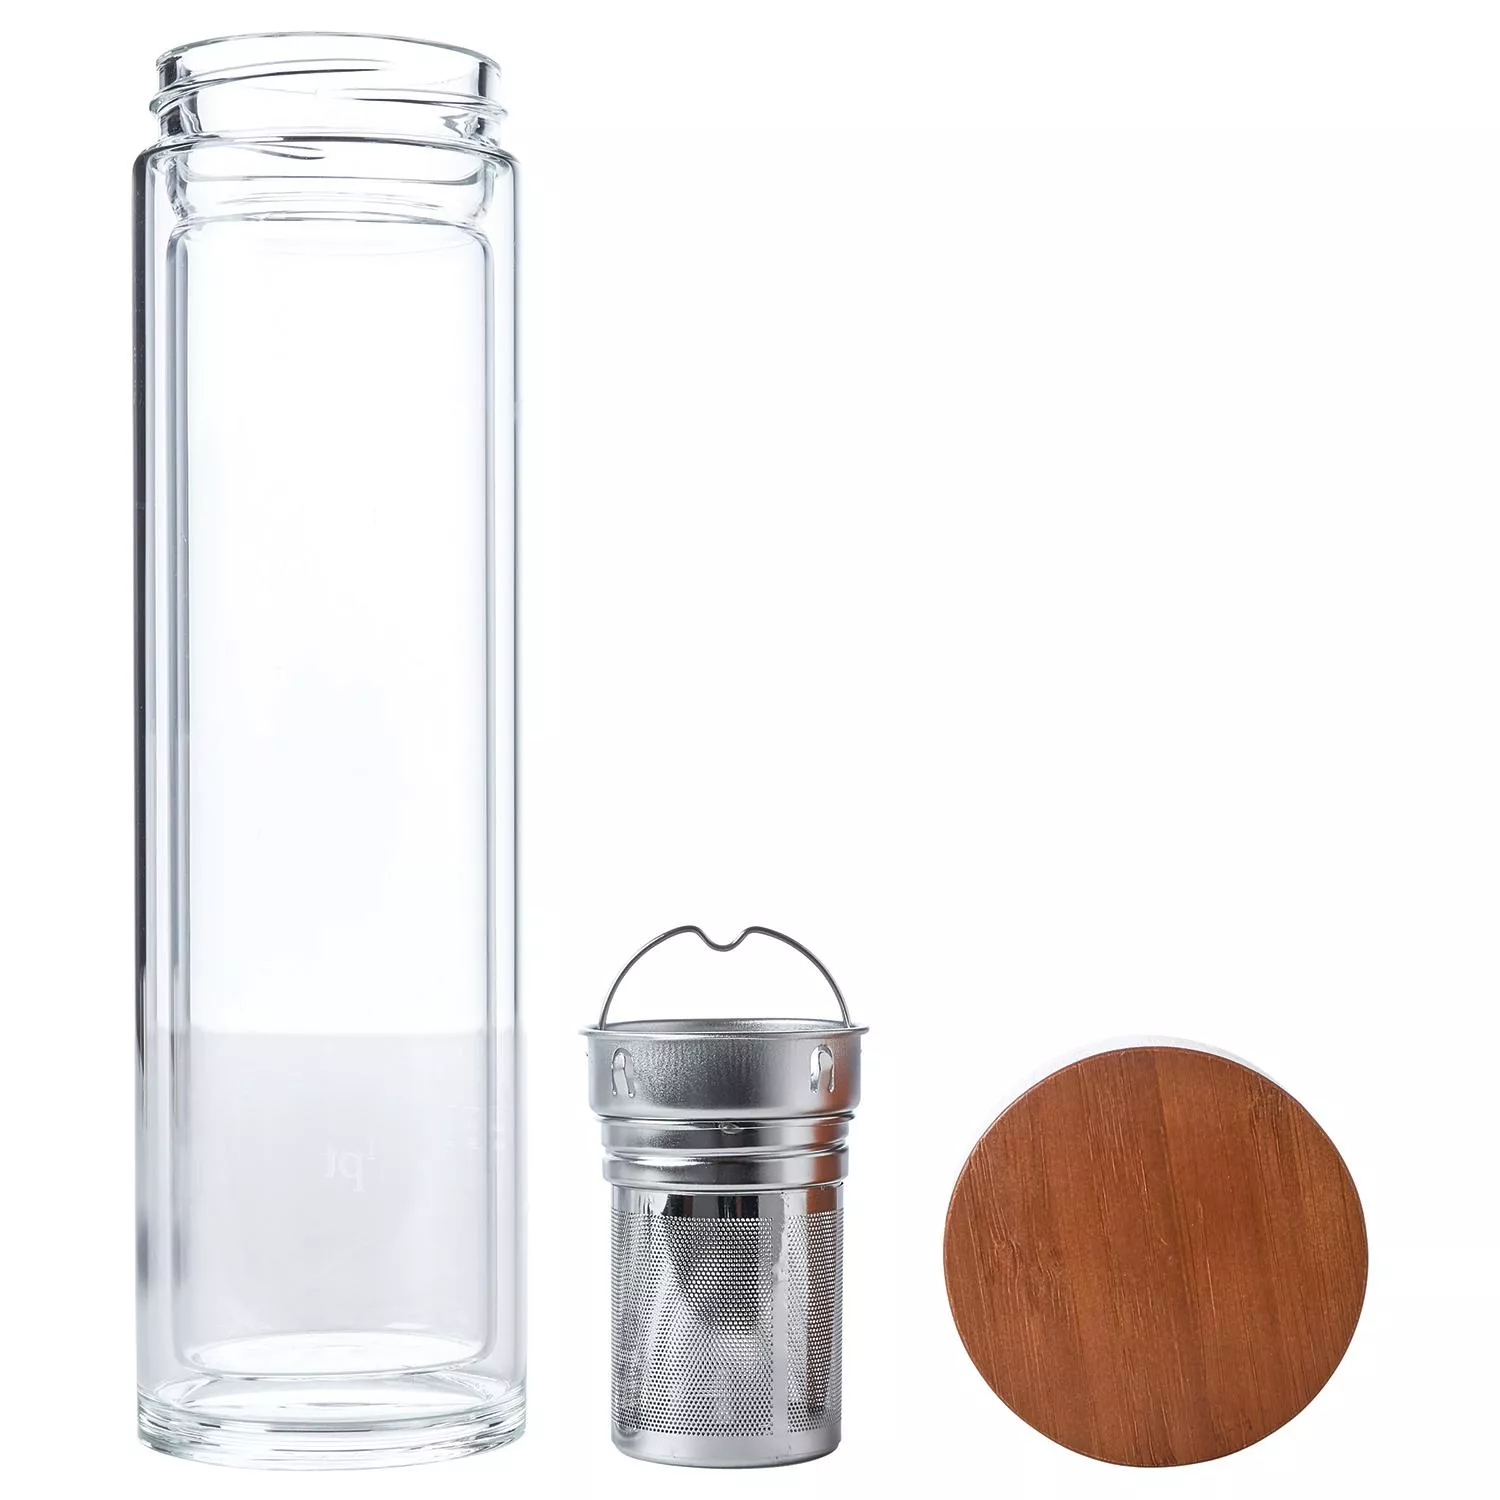 Reusable Beverage Cold Drink Container for Home and Kitchen Cork